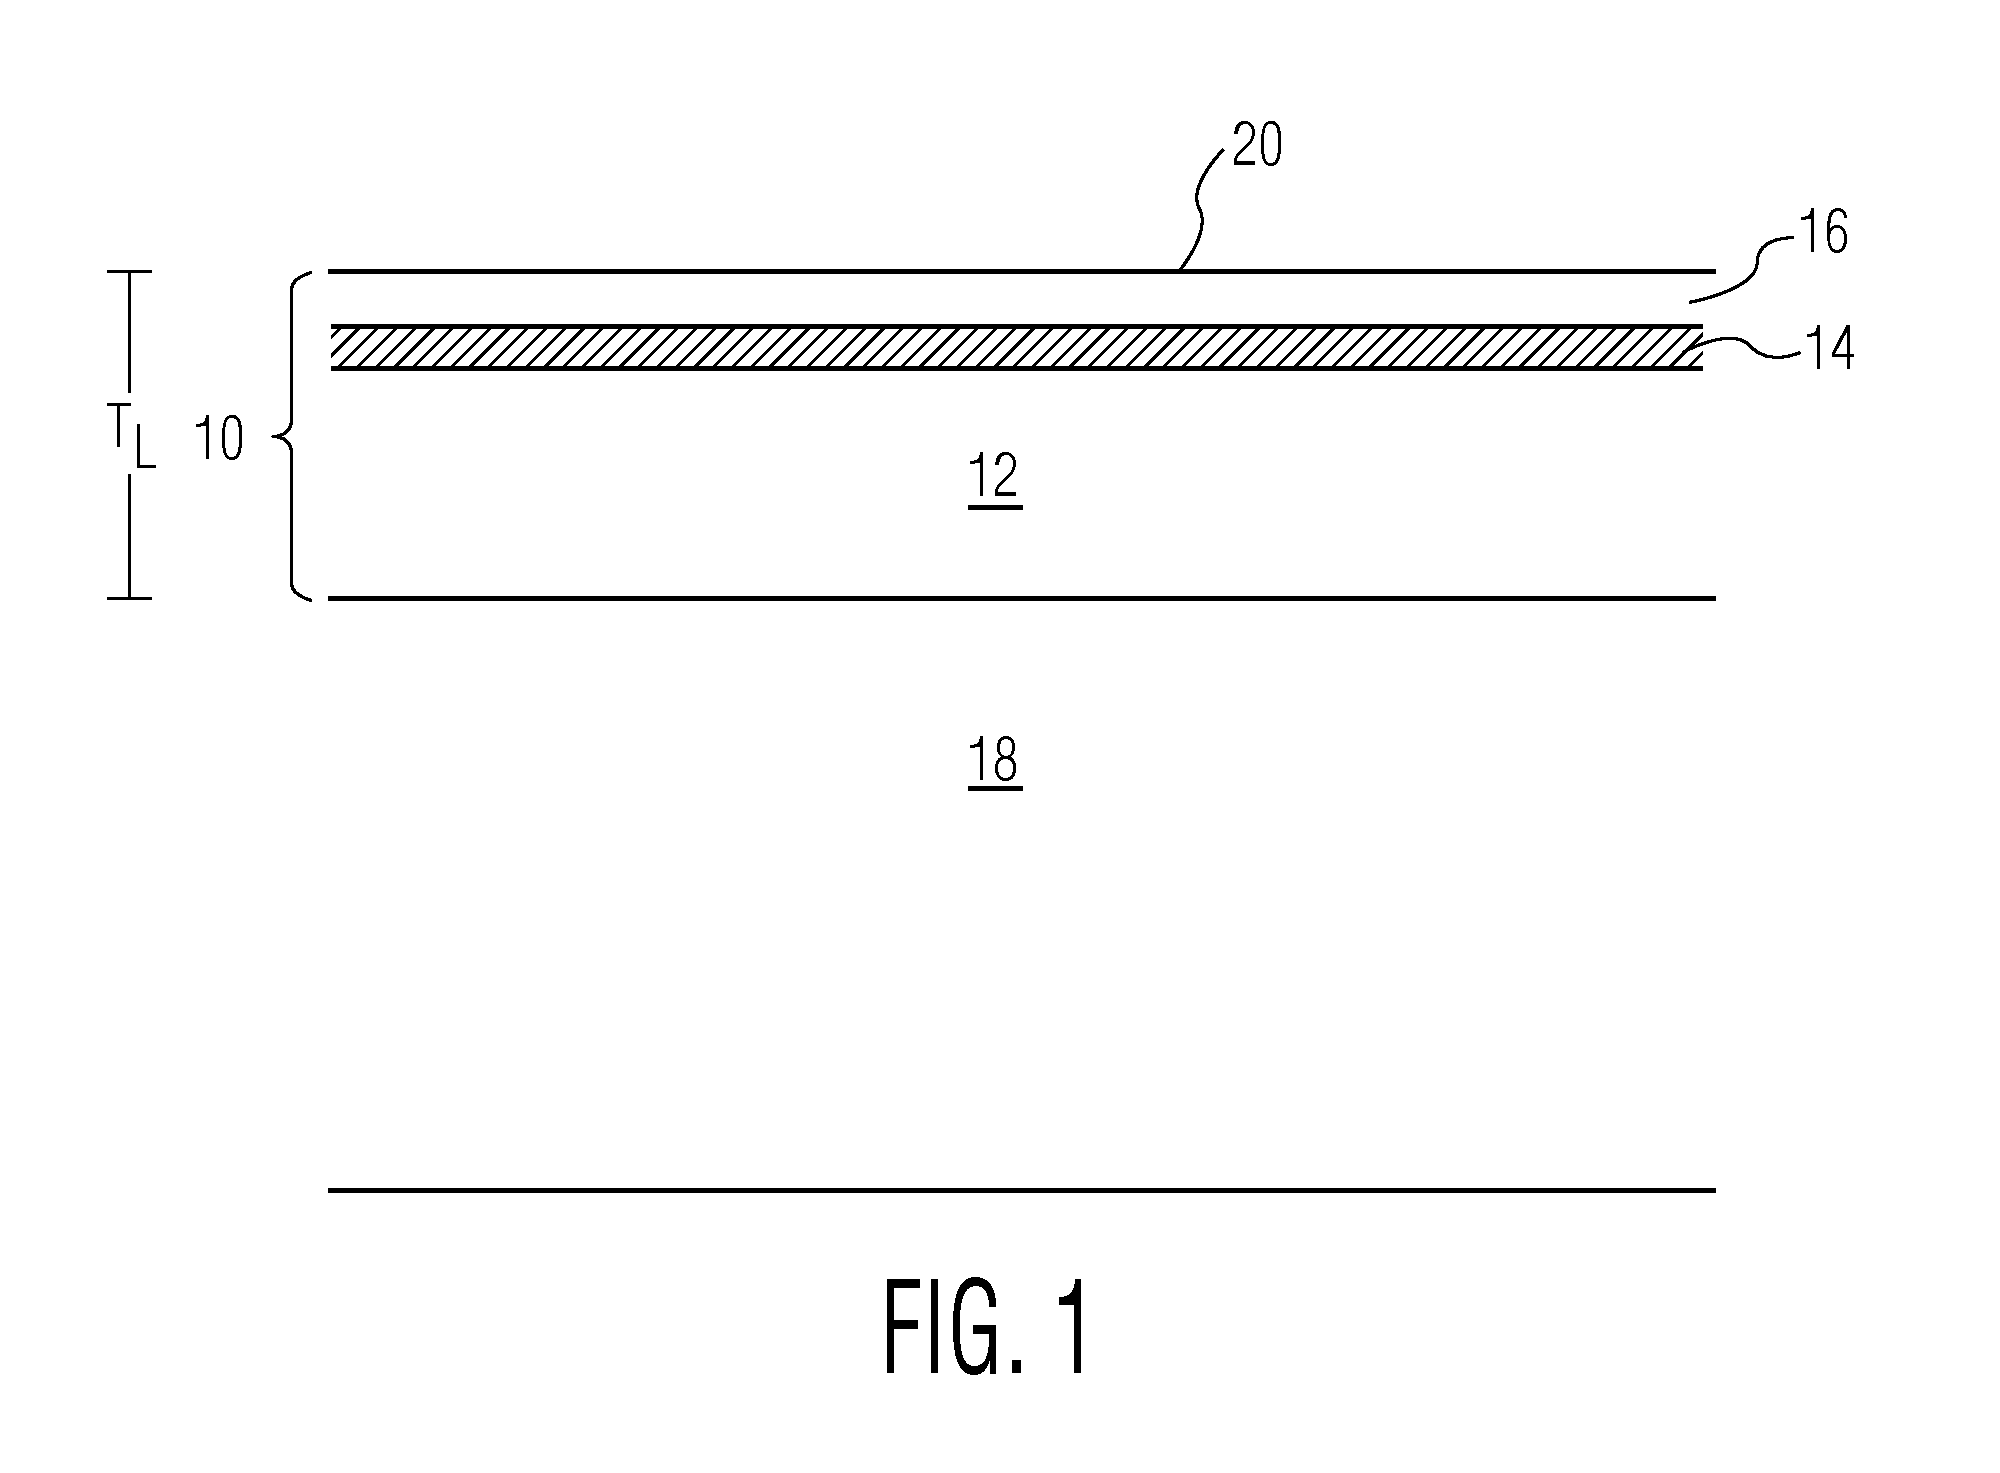 Transparent polyurethane protective coating, film and laminate compositions with enhanced electrostatic dissipation capability, and methods for making same